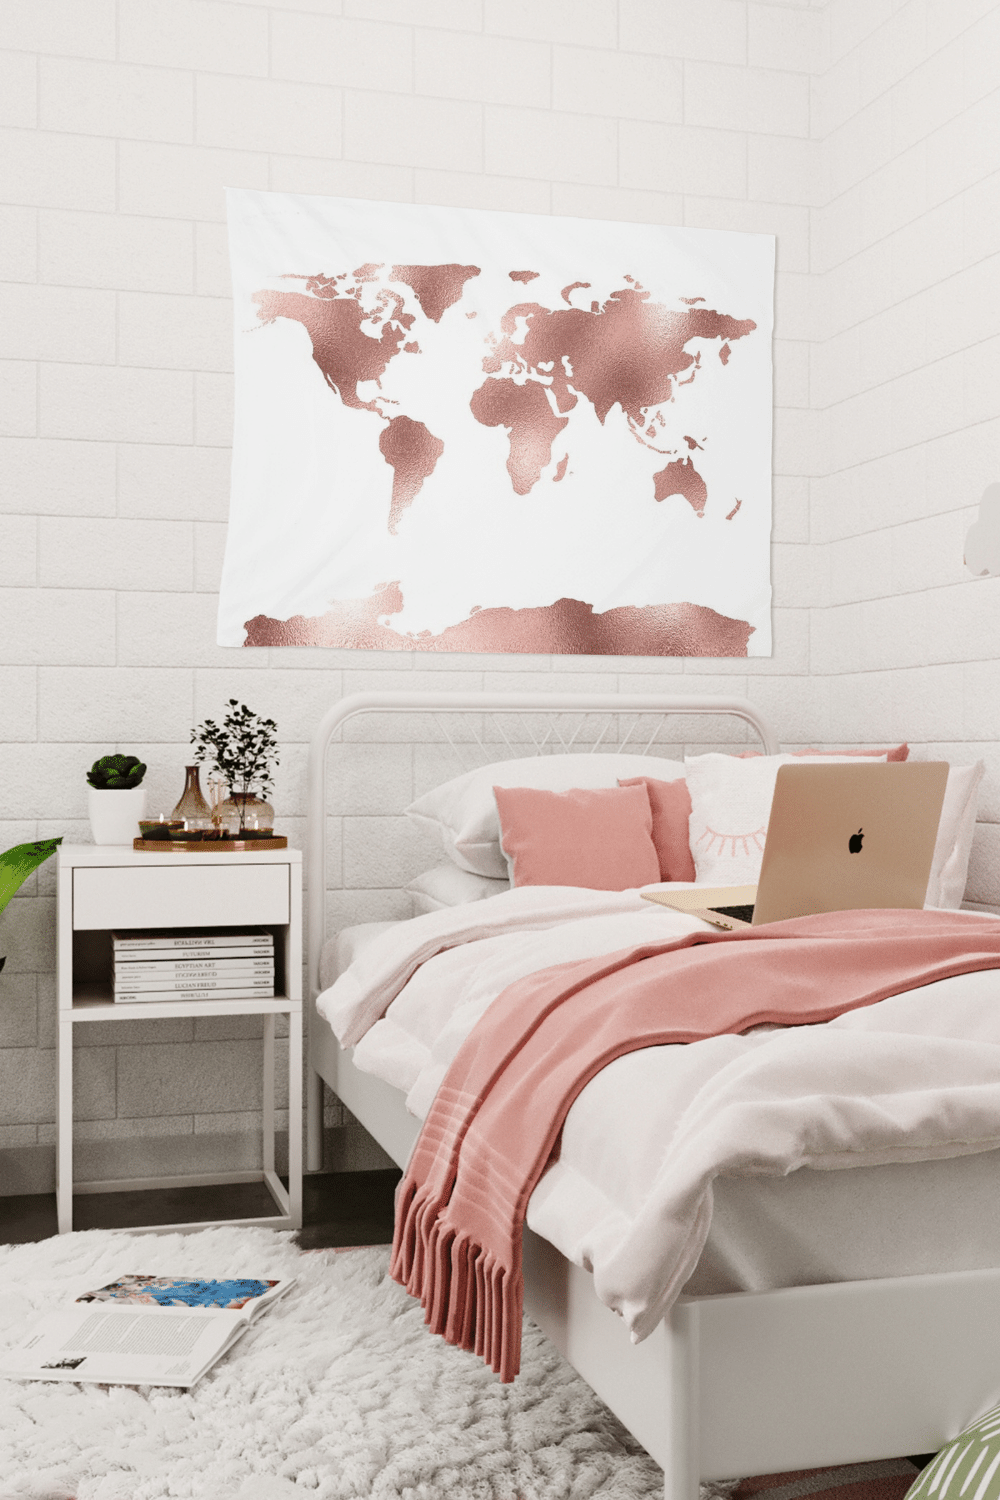 Tapestries - Dorm Room Wall Tapestry - Pink Map